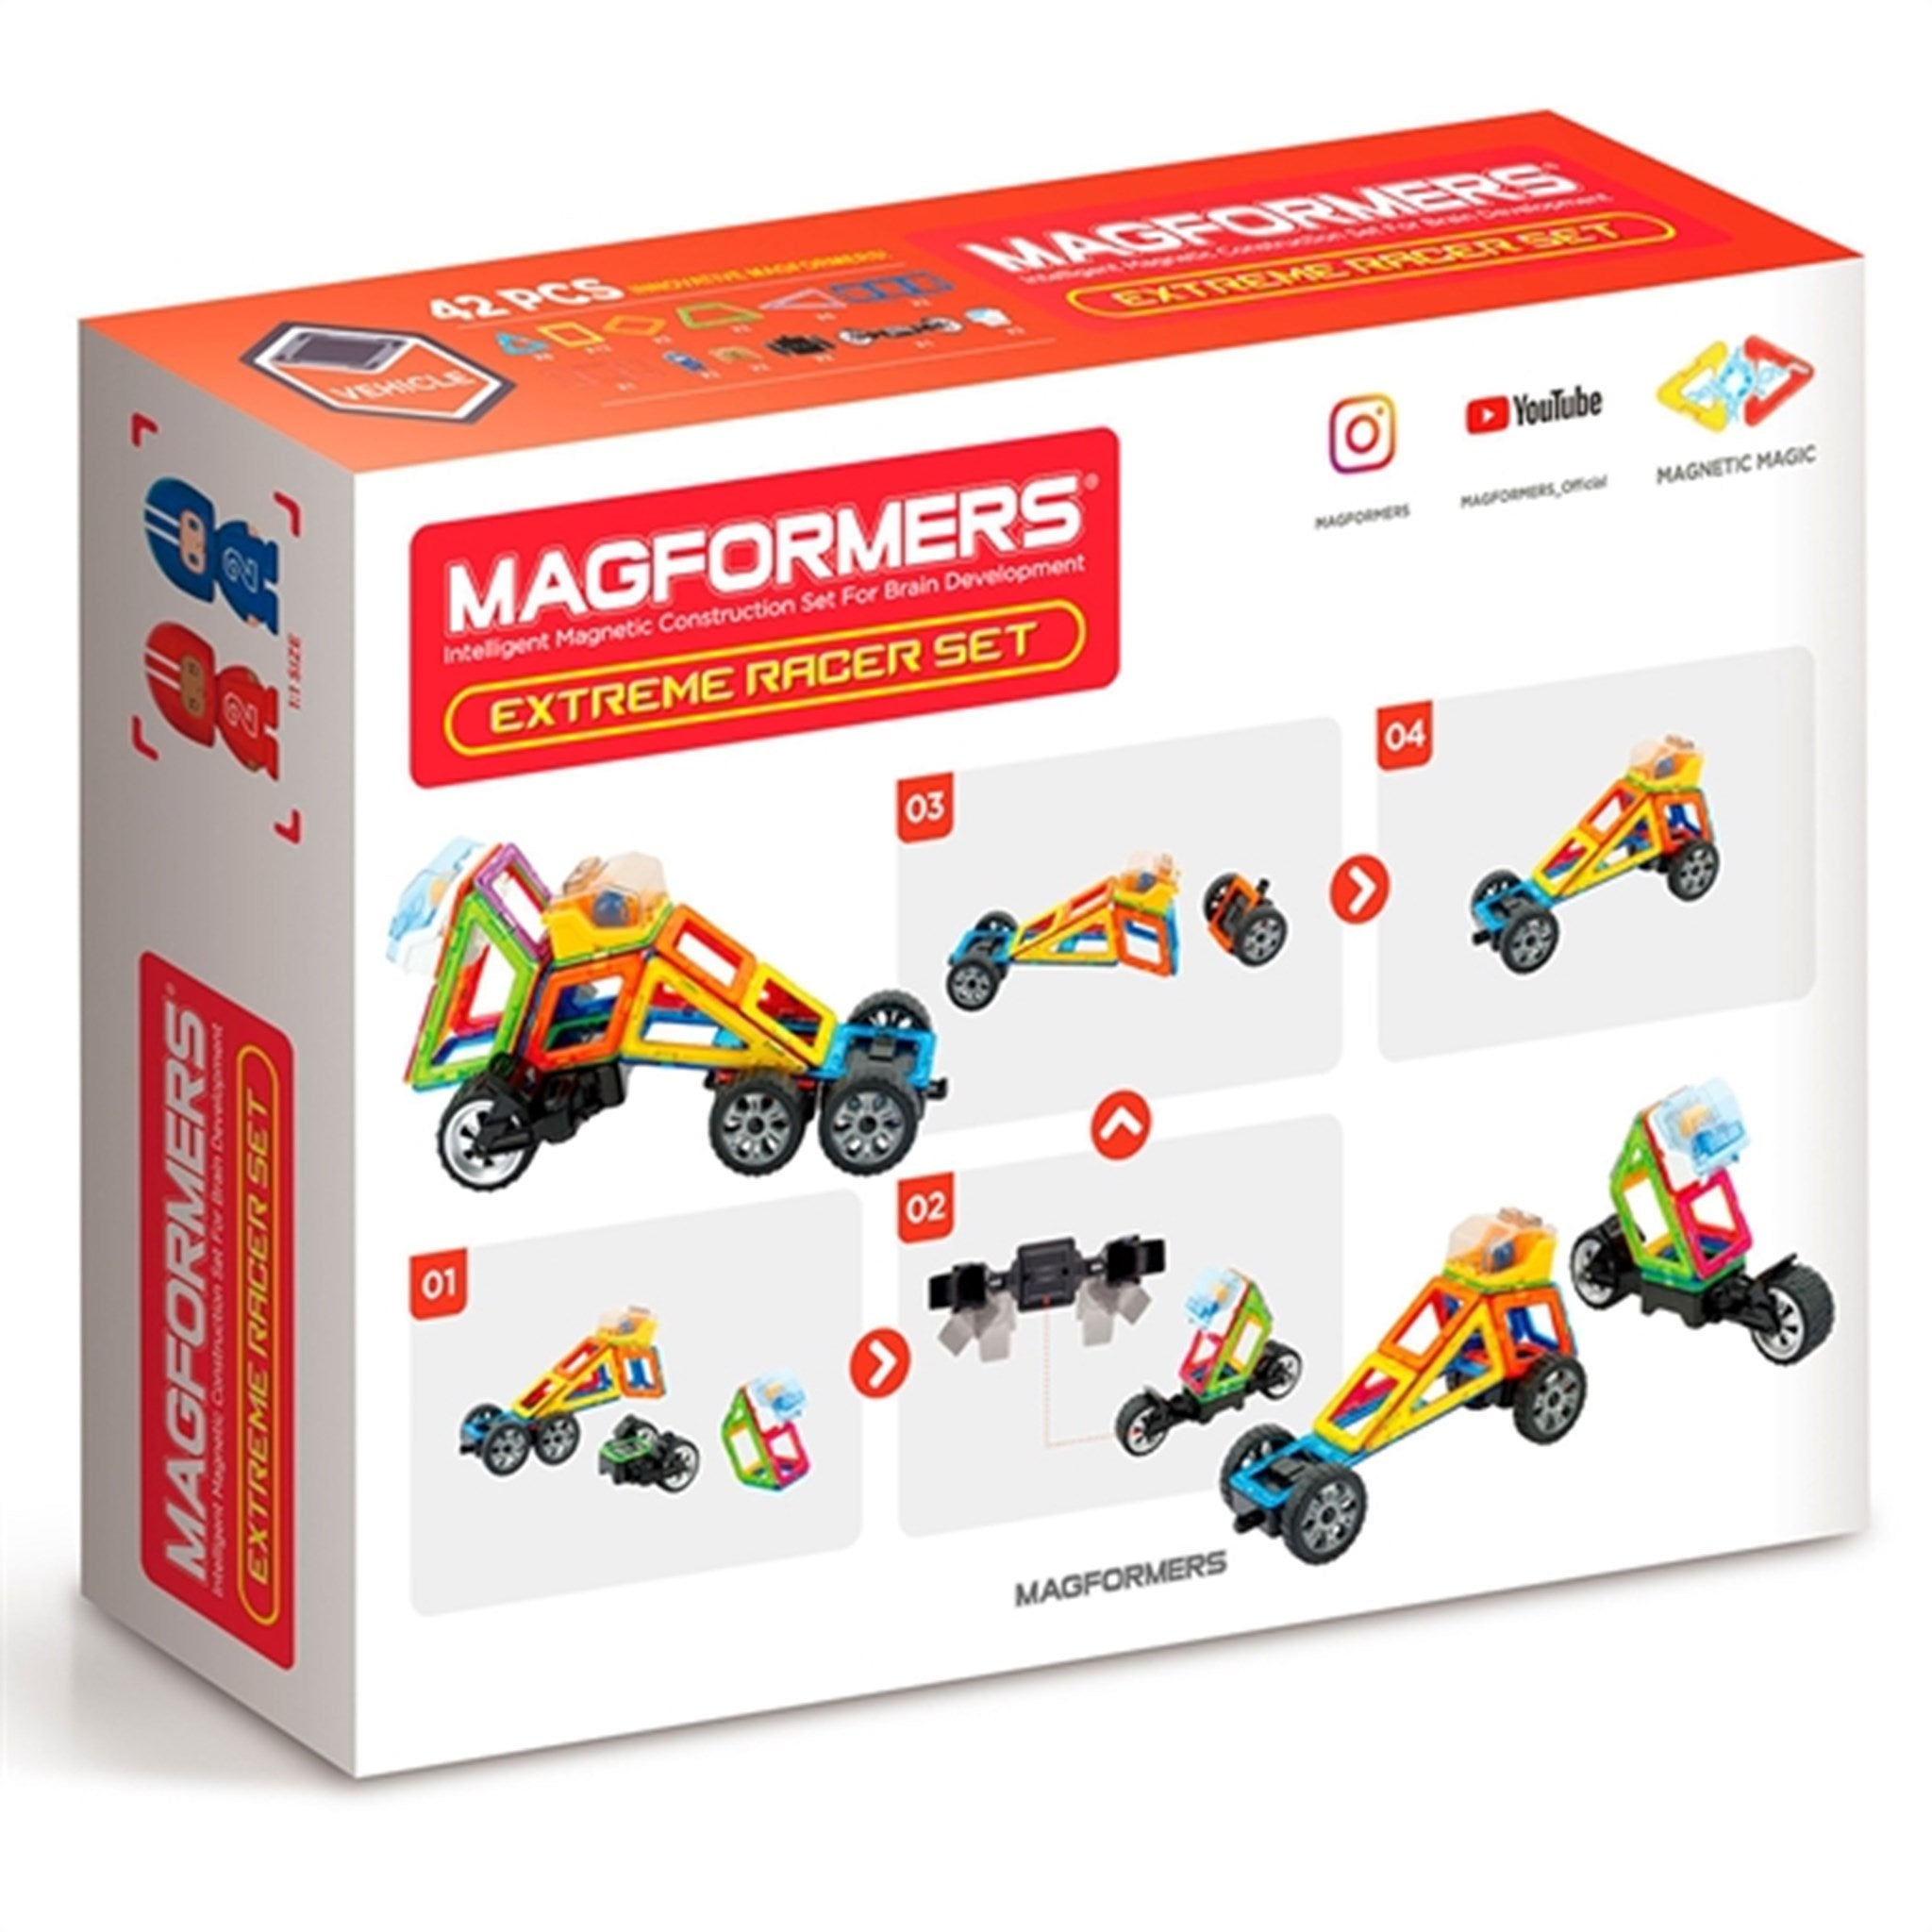 Magformers Extreme Racer Set 2